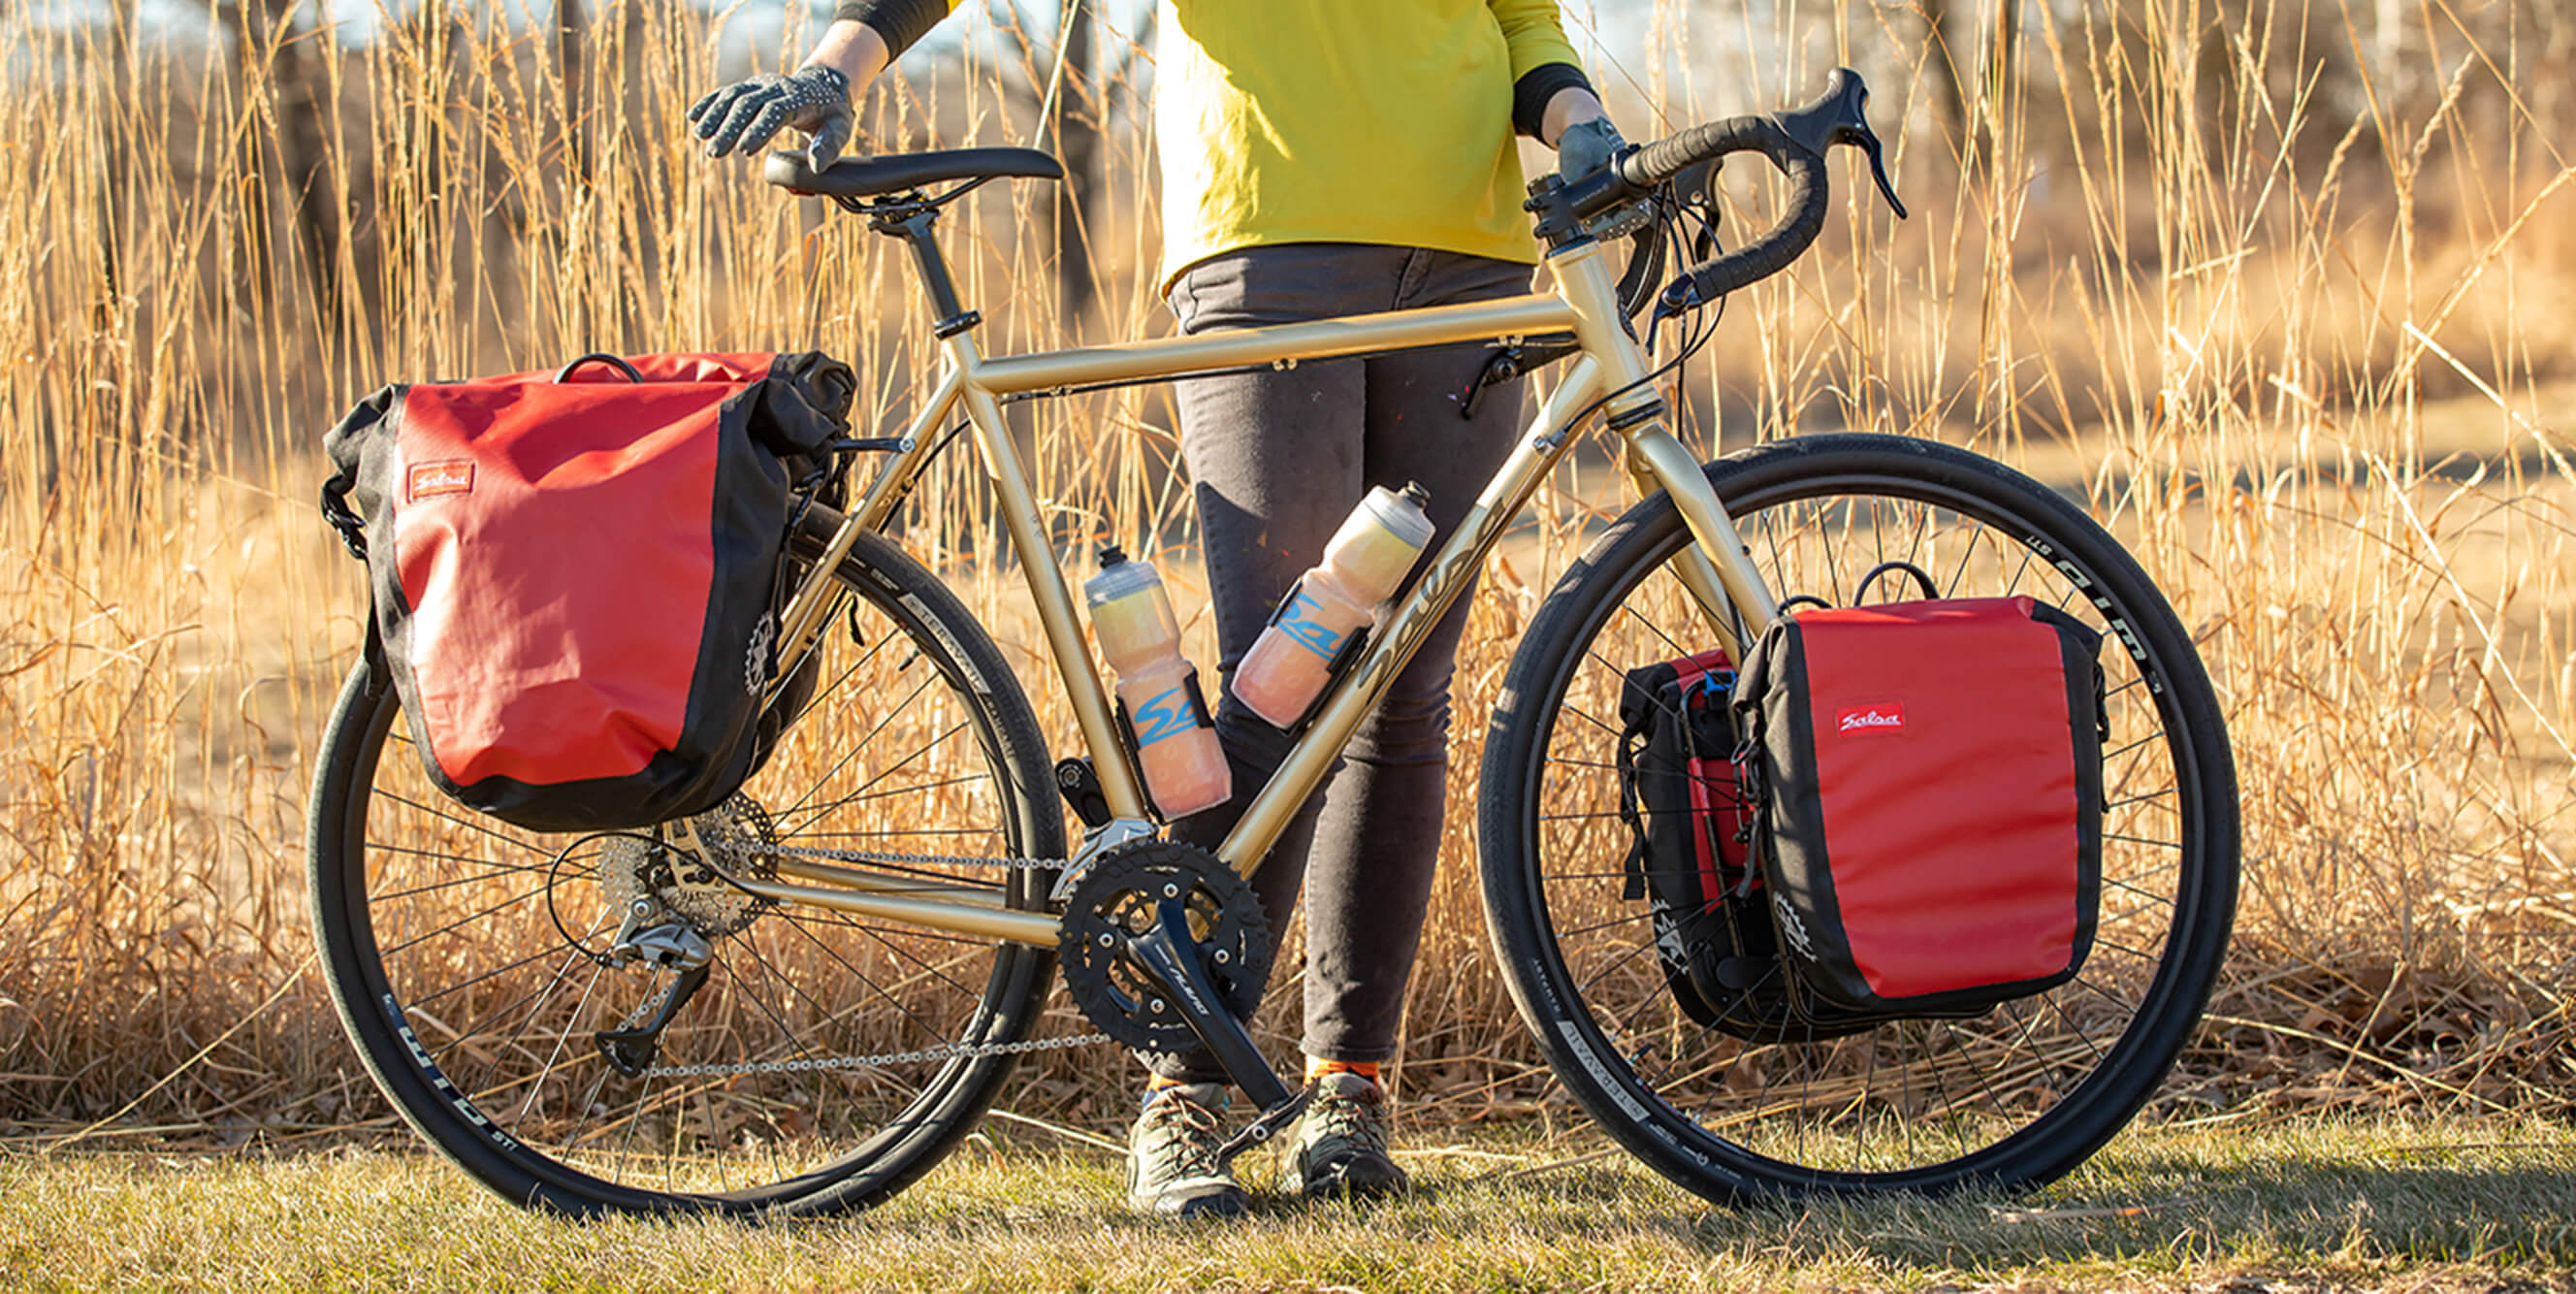 Touring bicycles offer so many different options for carrying weight